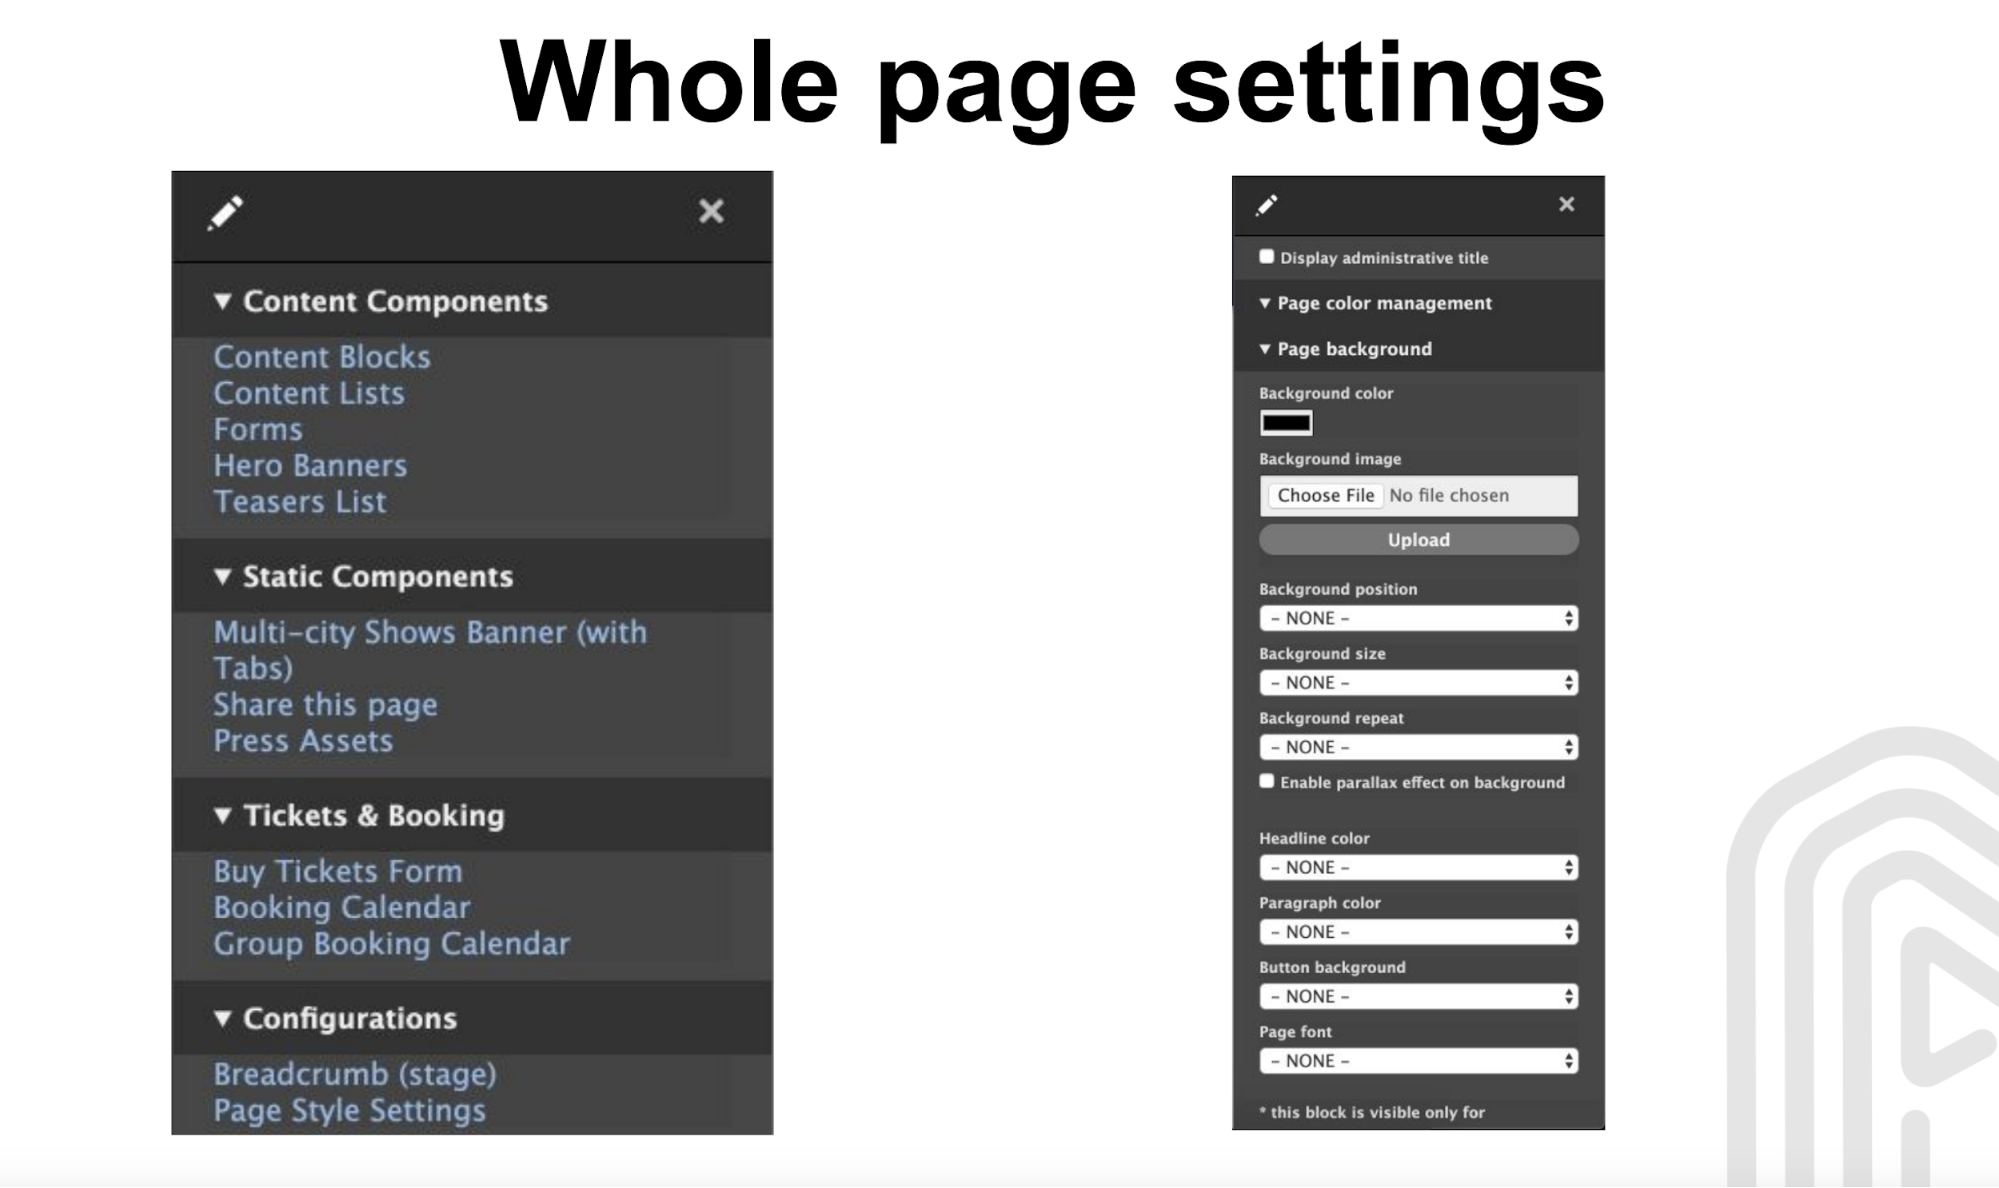 Whole page settings